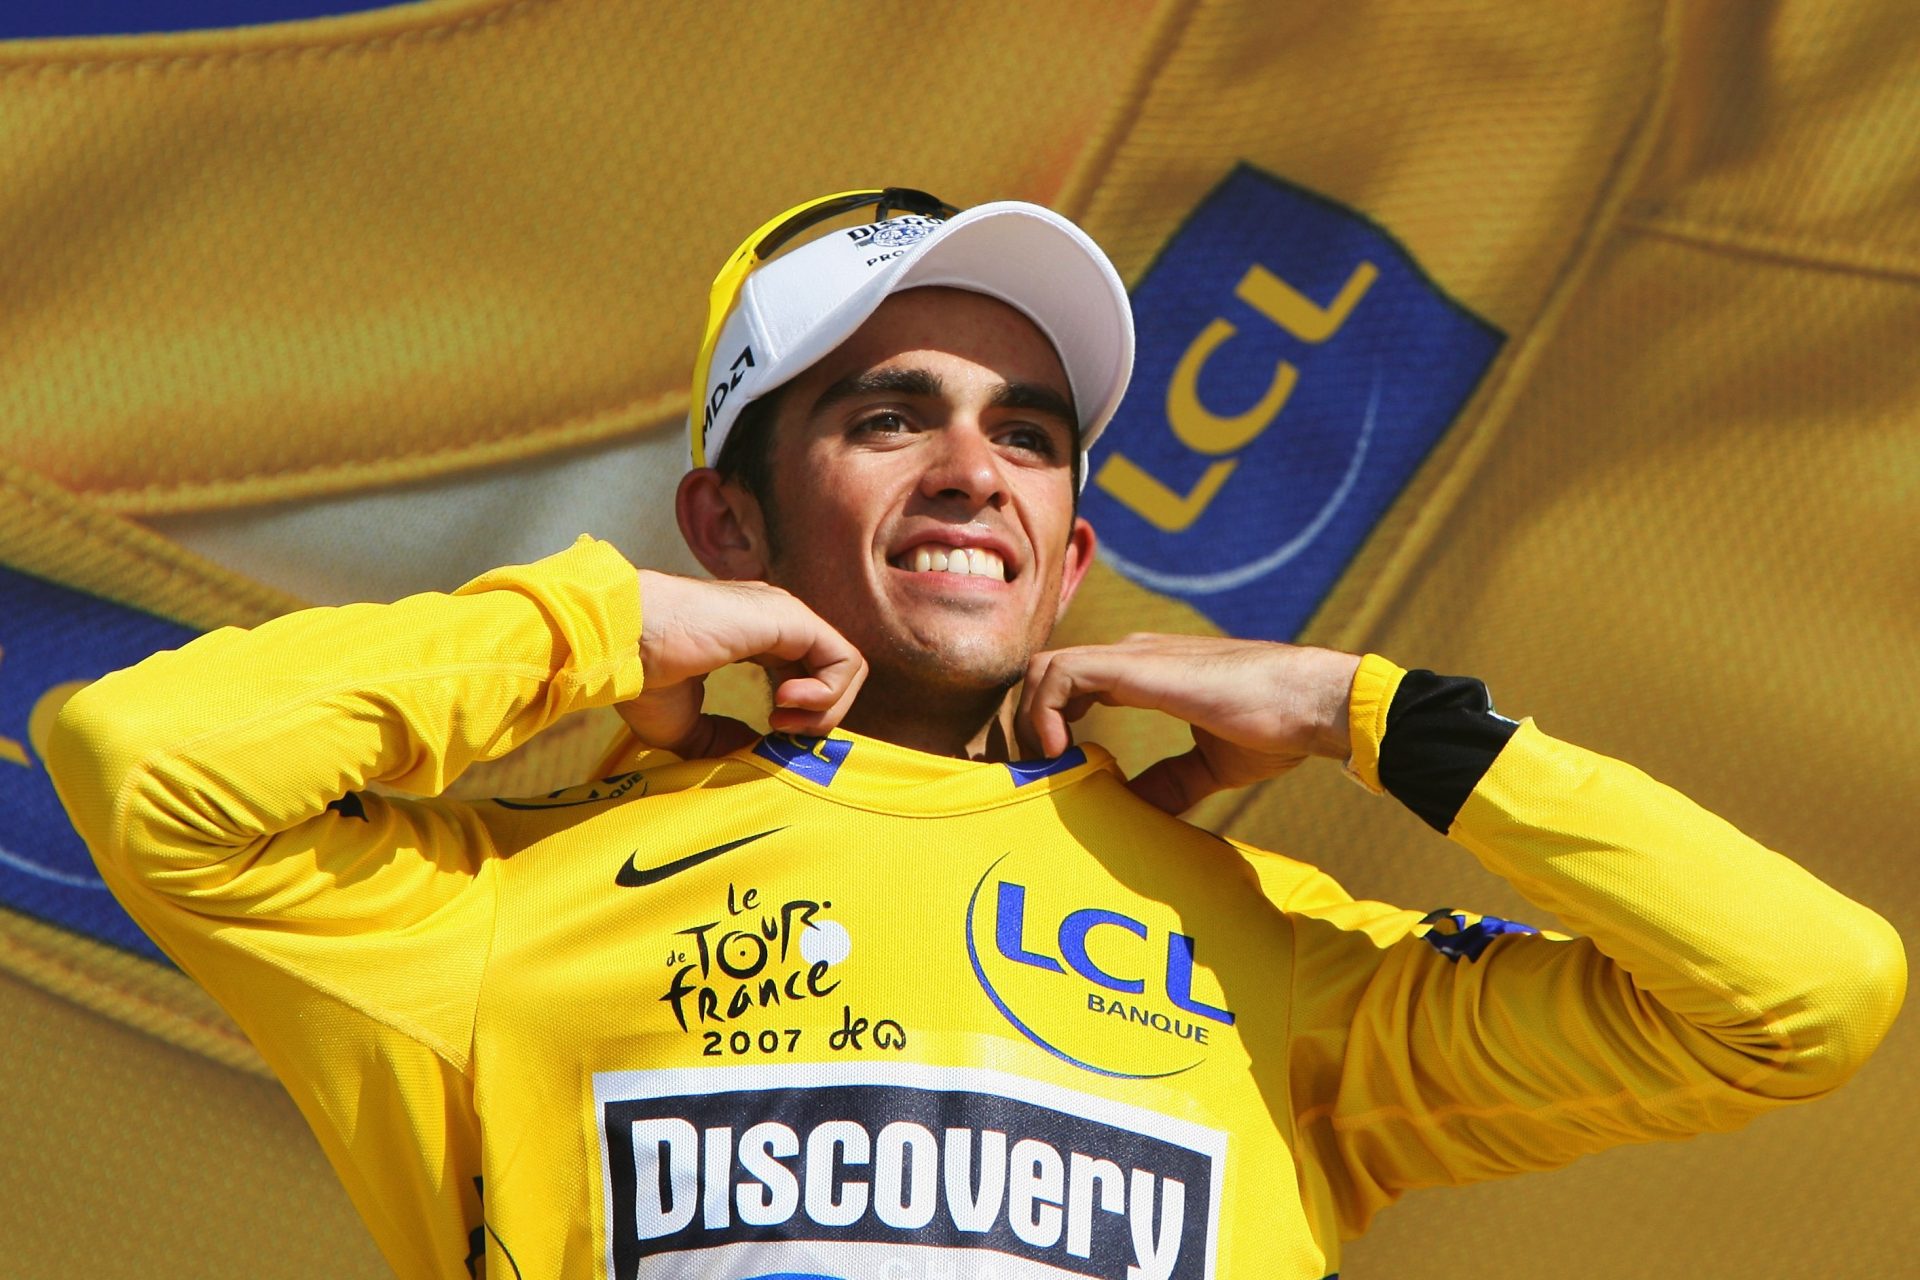 Near-death experiences and doping bans: What happened to cycling legend Alberto Contador?